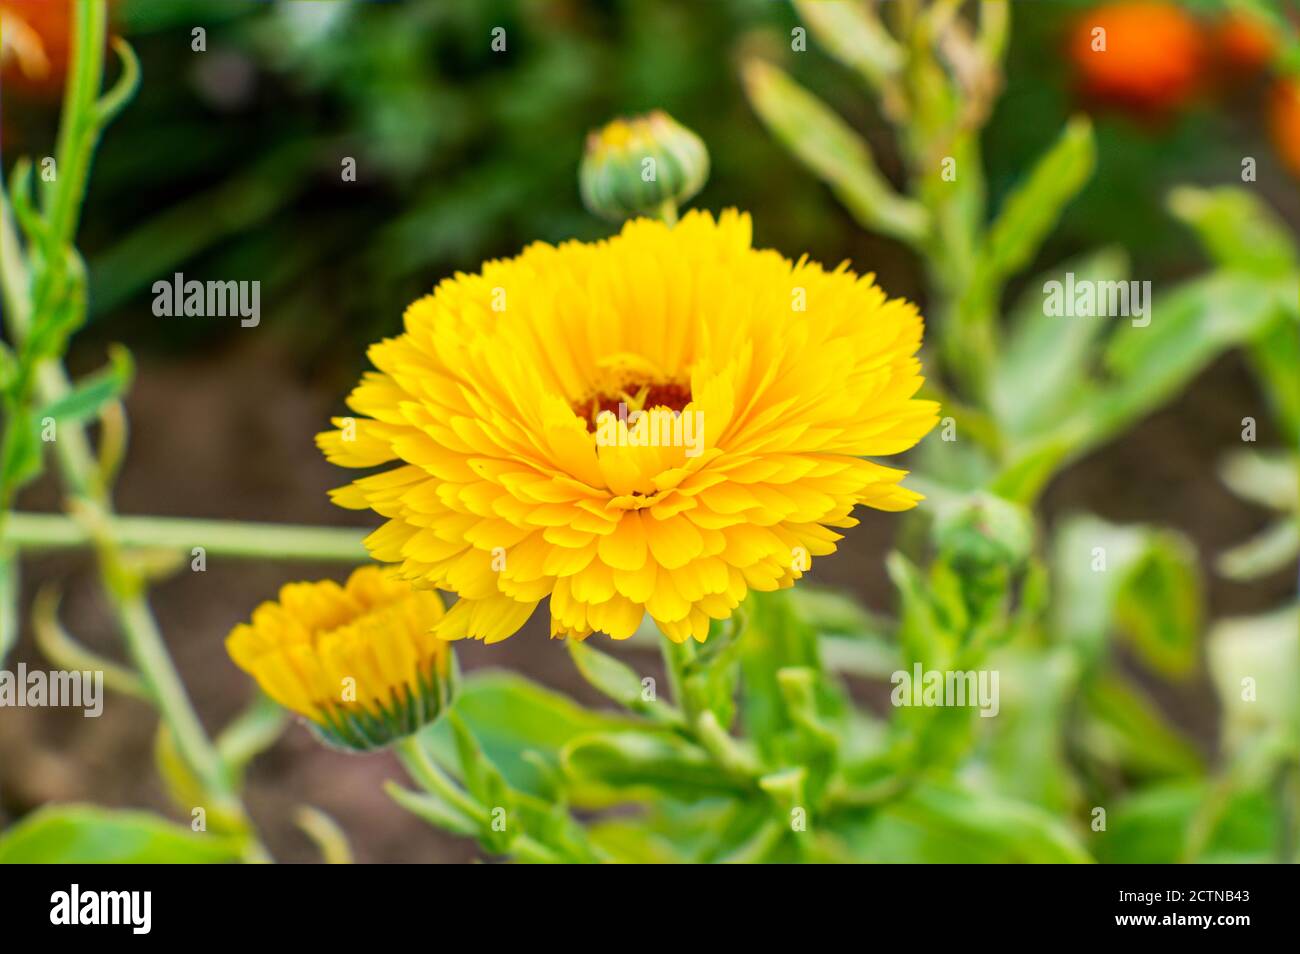 flower from the Asteraceae family with yellow petals on the background of other flowers Stock Photo